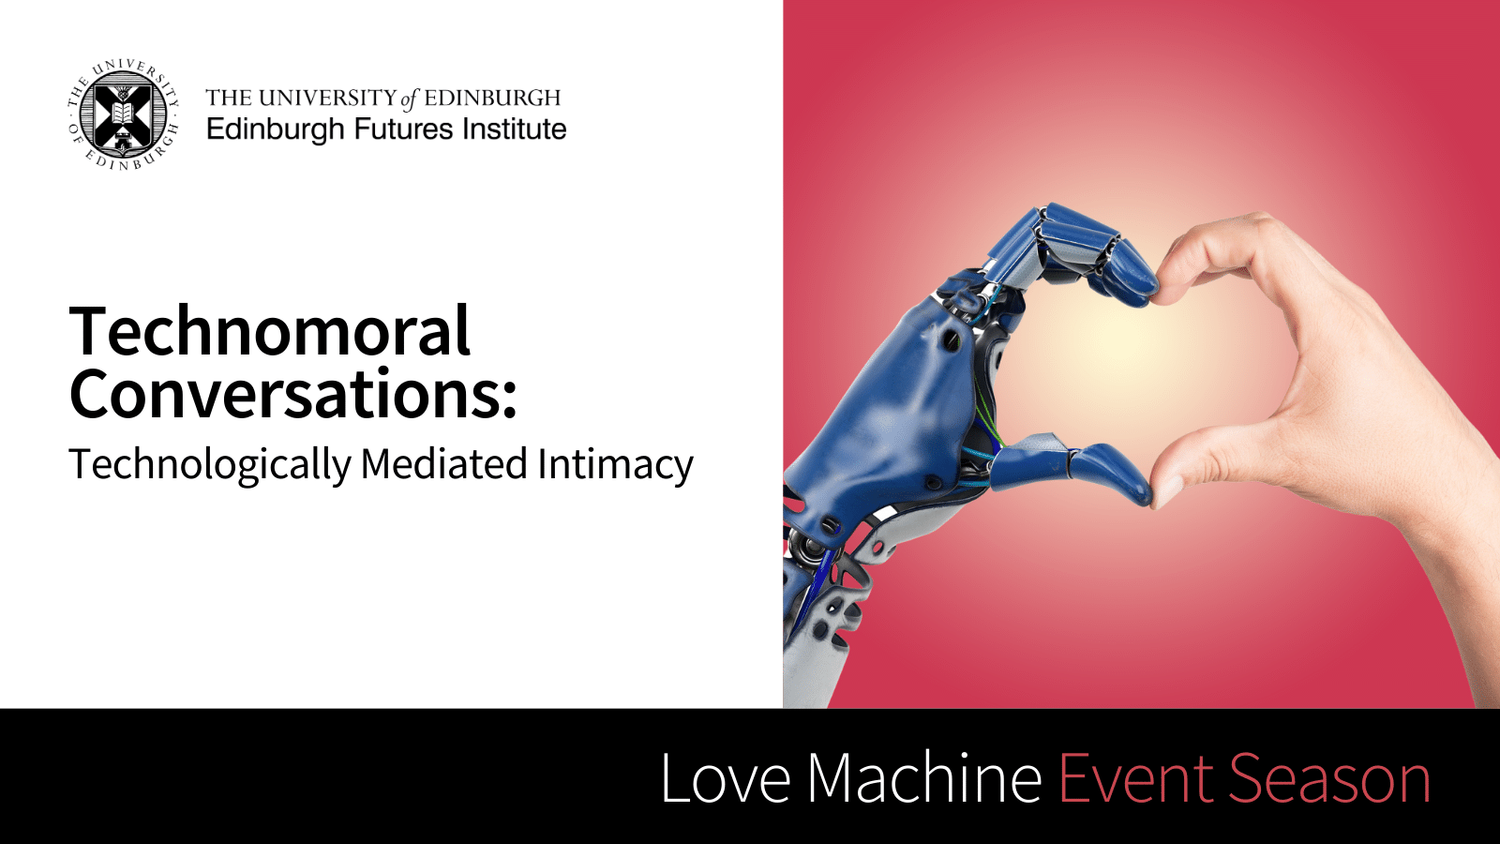 Technomoral Conversations: Technologically Mediated Intimacy